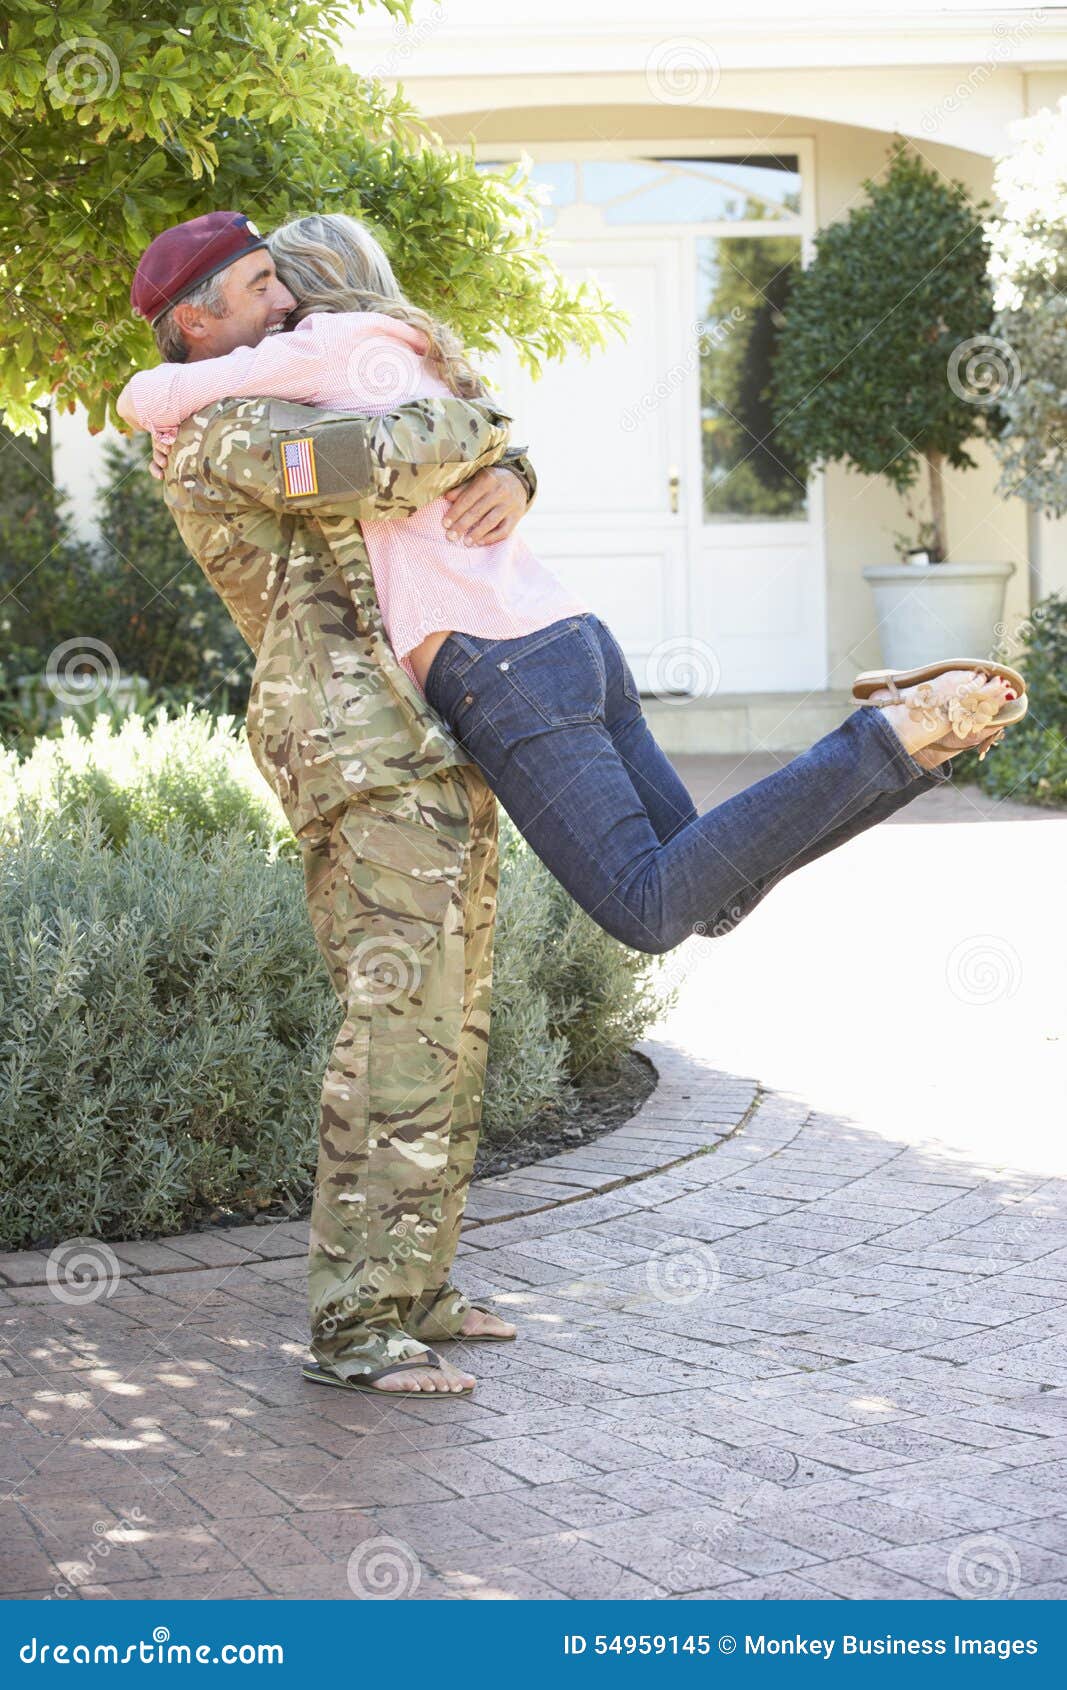 wifey welcoming home young soldier